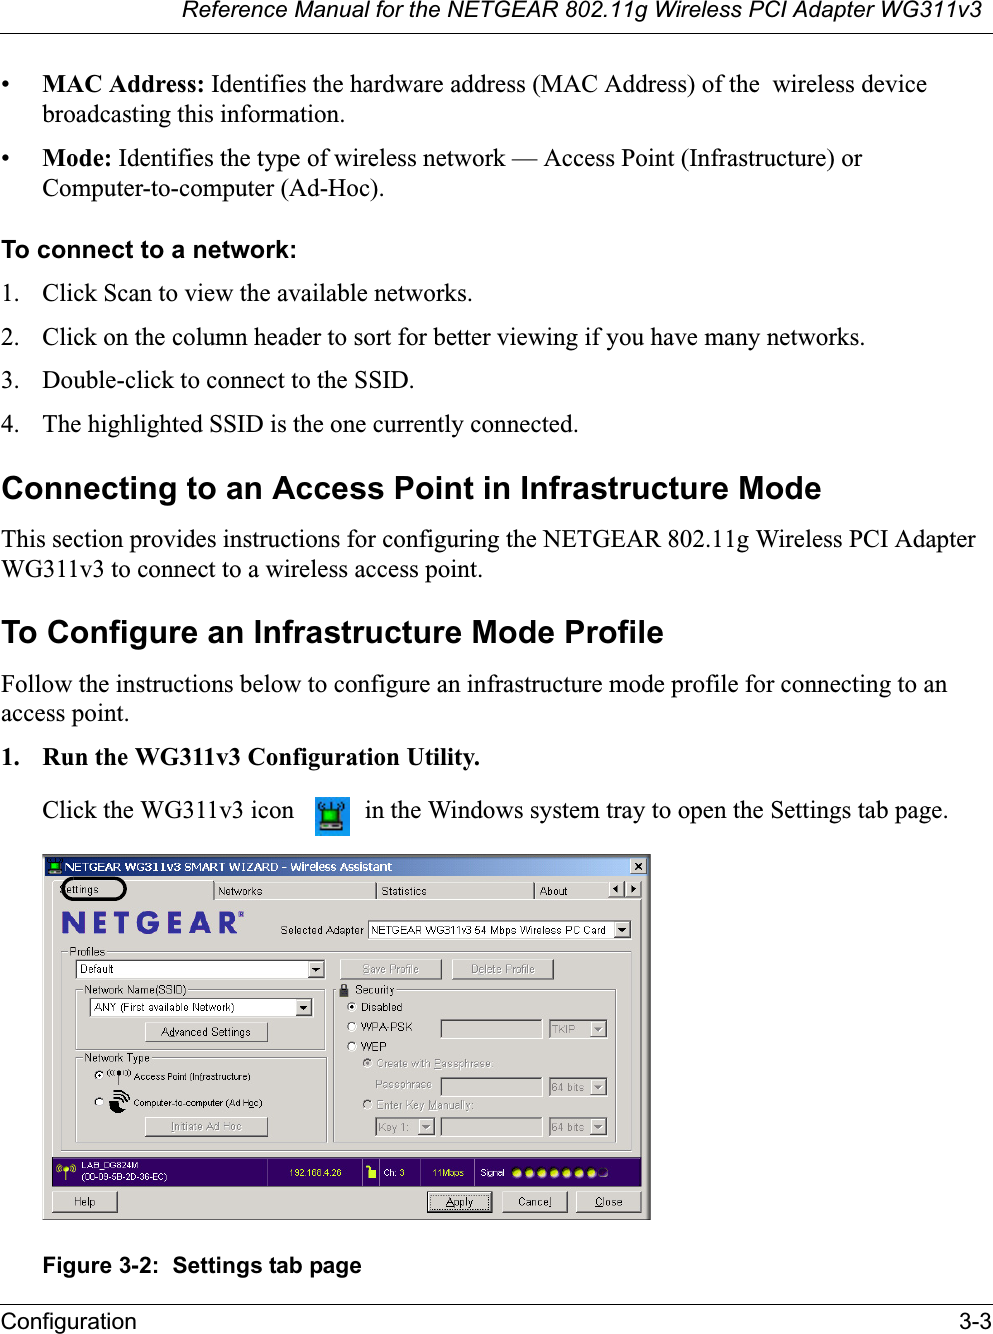 Reference Manual for the NETGEAR 802.11g Wireless PCI Adapter WG311v3Configuration 3-3•MAC Address: Identifies the hardware address (MAC Address) of the  wireless device broadcasting this information.•Mode: Identifies the type of wireless network — Access Point (Infrastructure) or Computer-to-computer (Ad-Hoc).To connect to a network:1. Click Scan to view the available networks.2. Click on the column header to sort for better viewing if you have many networks.3. Double-click to connect to the SSID.4. The highlighted SSID is the one currently connected.Connecting to an Access Point in Infrastructure ModeThis section provides instructions for configuring the NETGEAR 802.11g Wireless PCI AdapterWG311v3 to connect to a wireless access point. To Configure an Infrastructure Mode ProfileFollow the instructions below to configure an infrastructure mode profile for connecting to an access point.1. Run the WG311v3 Configuration Utility.Click the WG311v3 icon   in the Windows system tray to open the Settings tab page. Figure 3-2:  Settings tab page